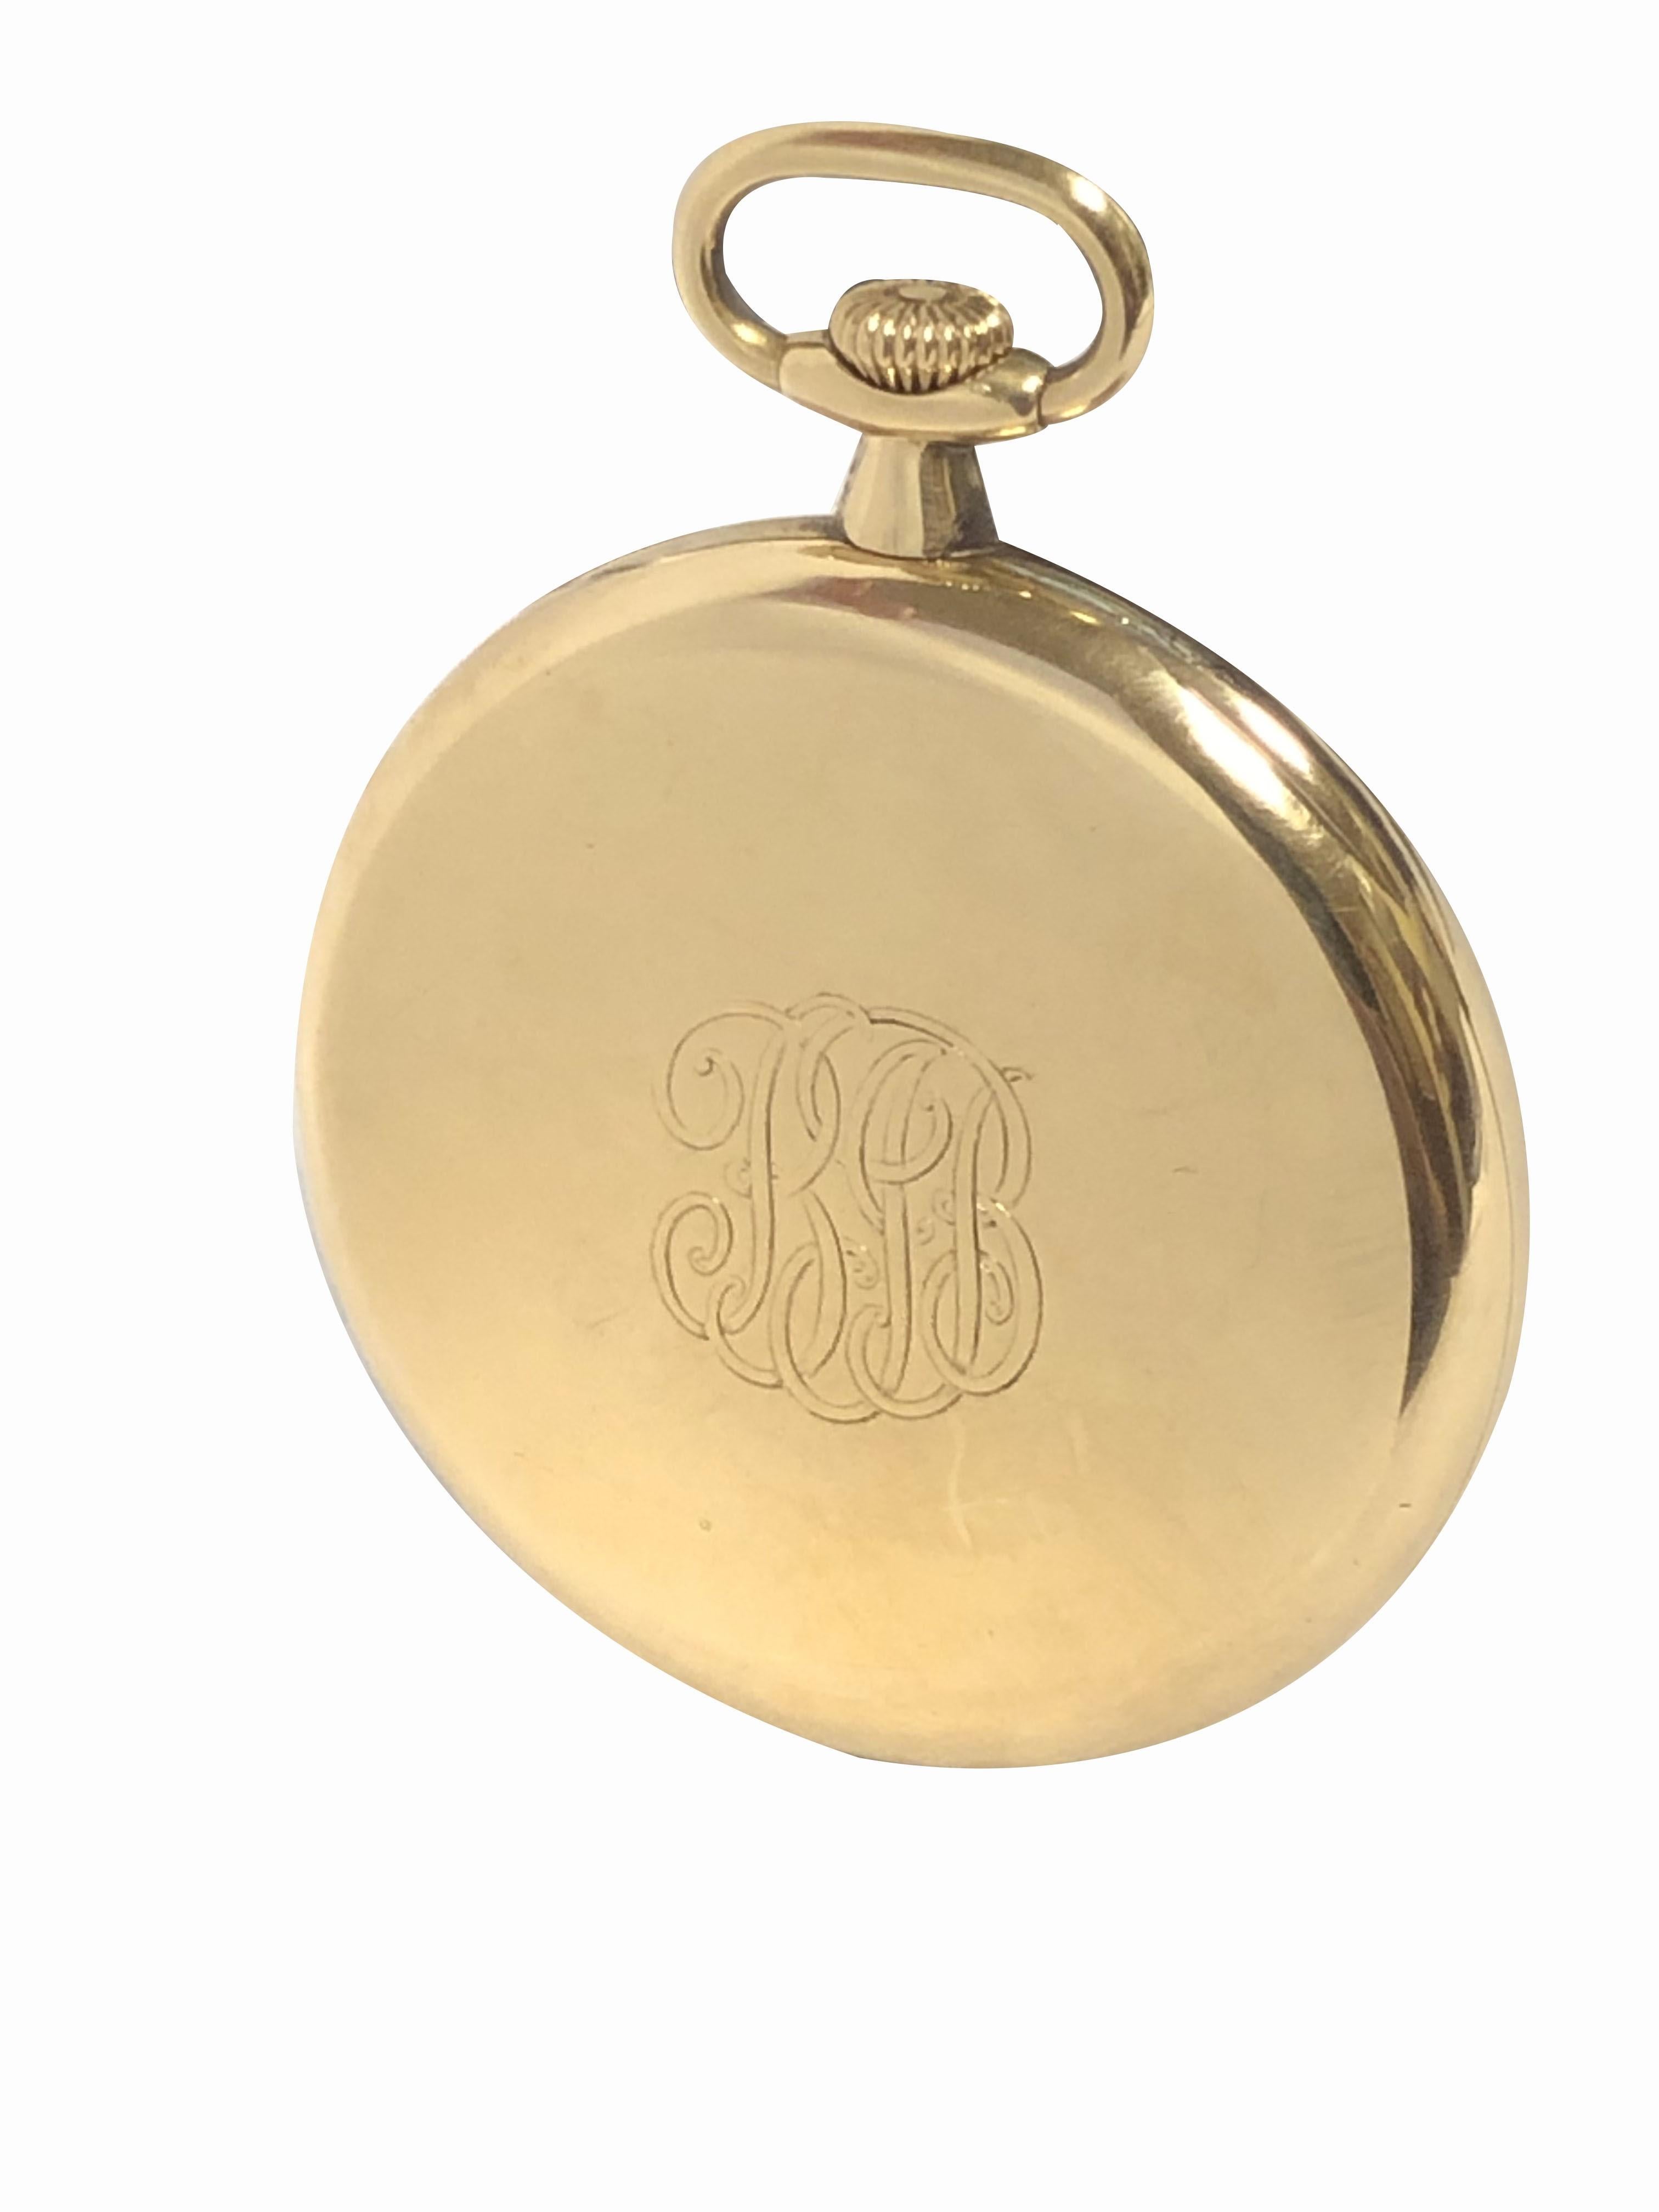 Circa 1920s Patek Philippe Pocket Watch retailed by Spaulding & Company, 47 M.M. 18K Yellow Gold 3 Piece case with inside Movement Dust cover,  20 Jewel mechanical, manual wind nickle lever movement. Porcelain dial with sub seconds chapter and